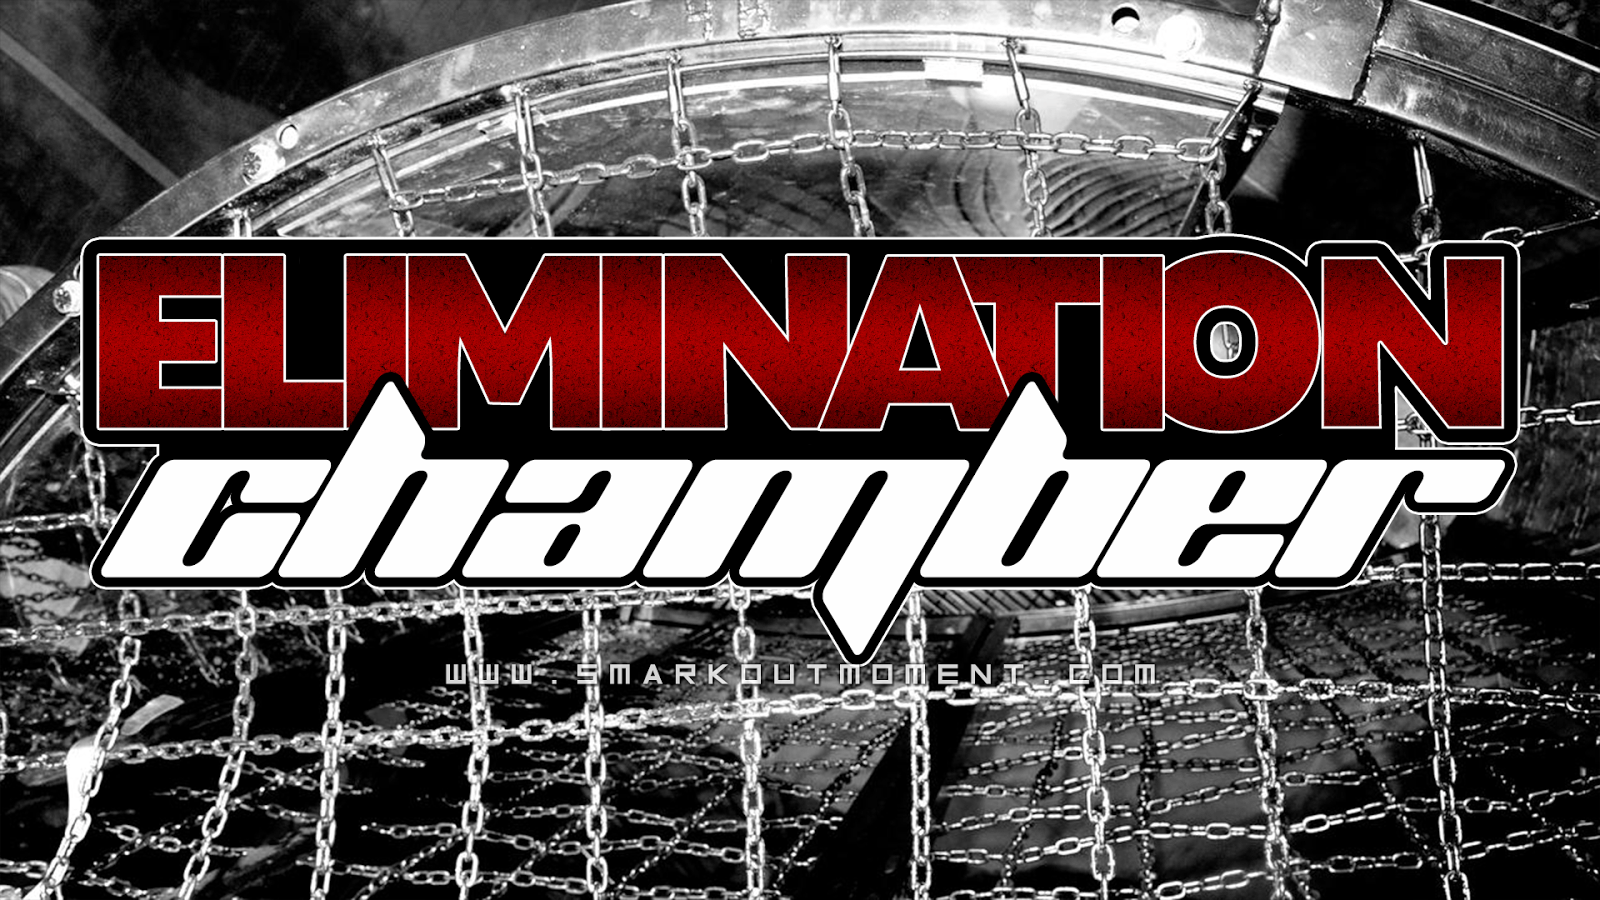 WWE Elimination Chamber PPV Wallpaper Posters and Logo Background